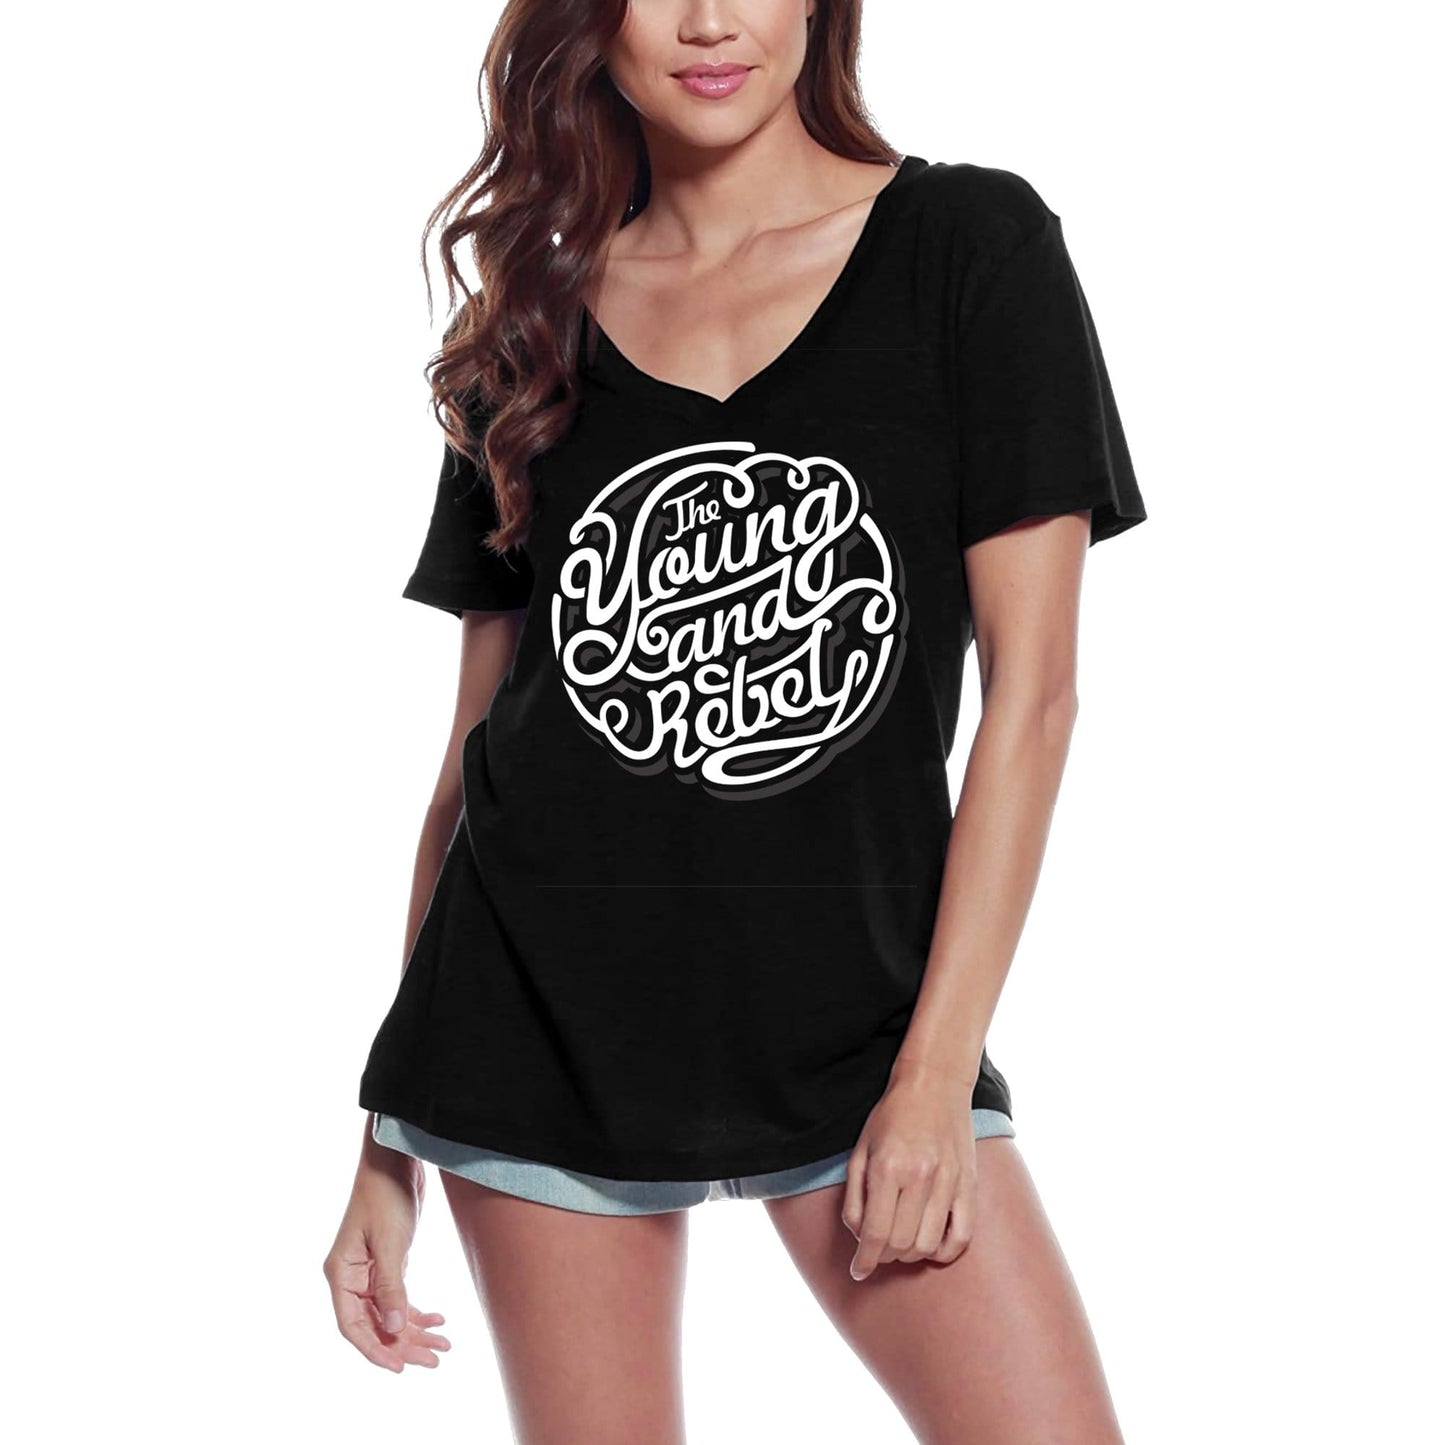 ULTRABASIC Women's T-Shirt The Young And Rebel - Funny Slogan Graphic Tee